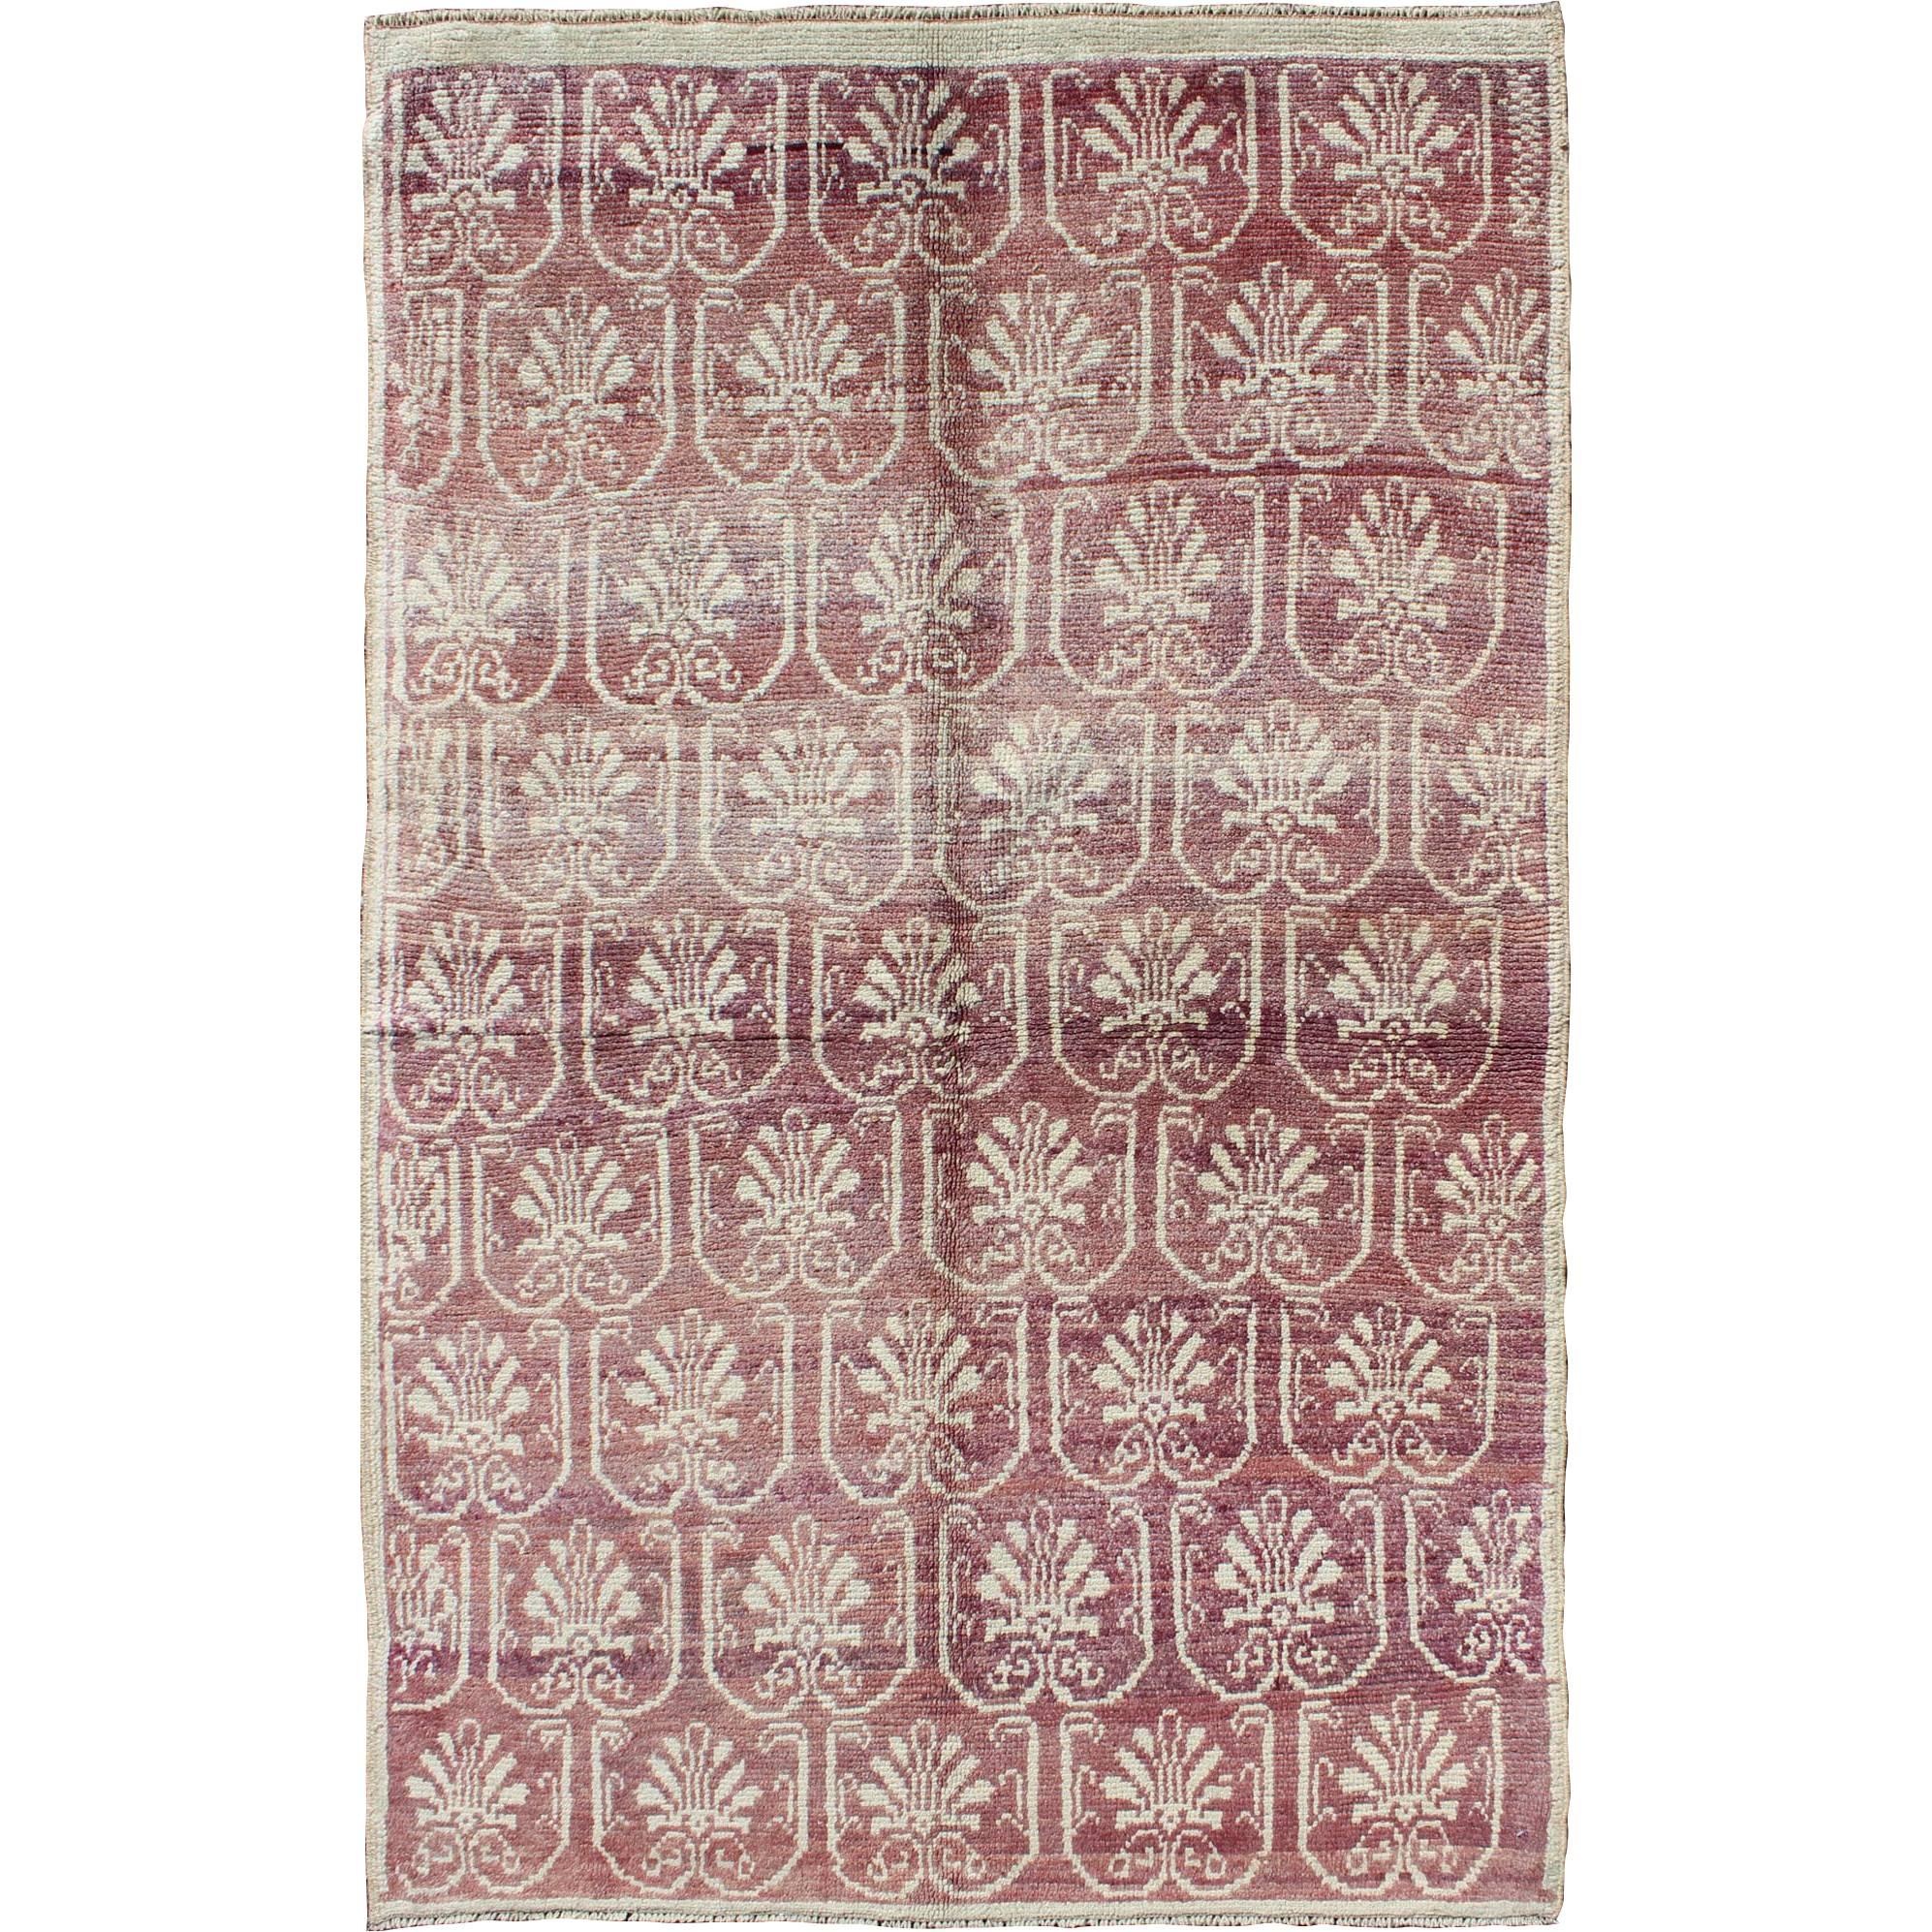 Unique Turkish Tulu Rug with All-Over Paisley Design in Light Aubergine & Ivory